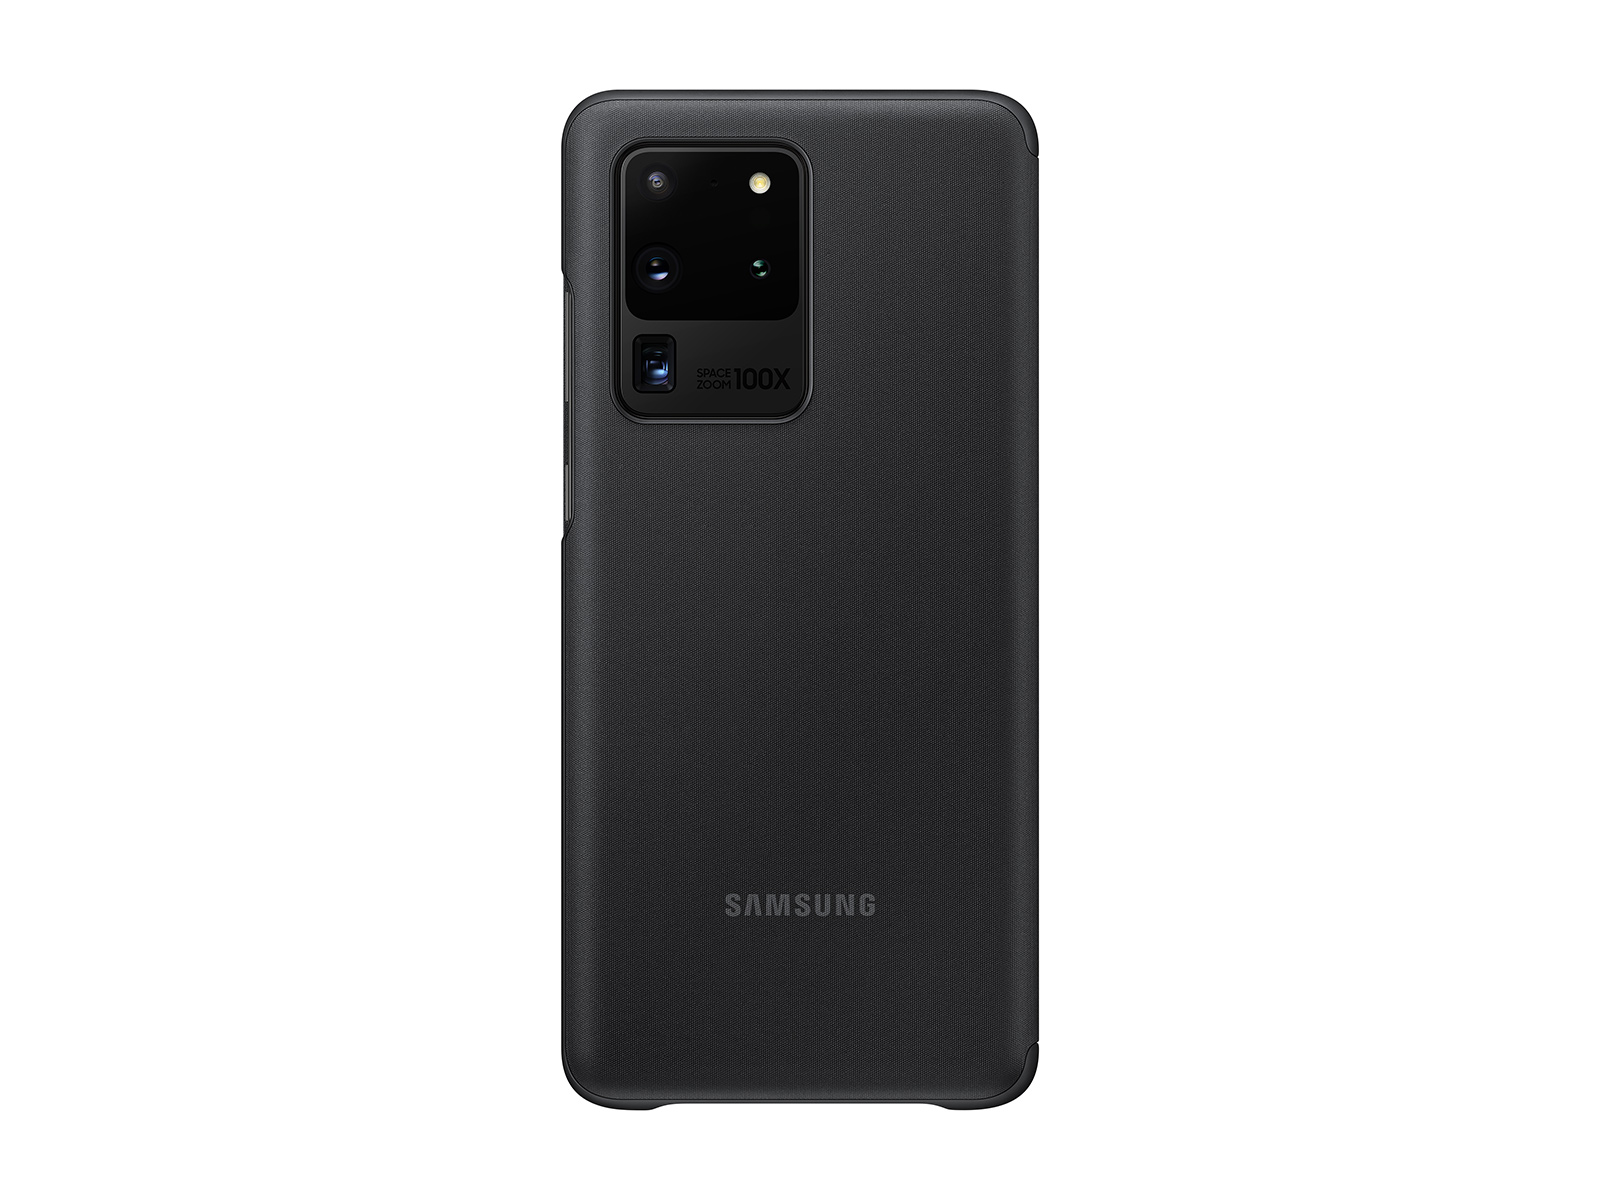 Thumbnail image of Galaxy S20 Ultra 5G S-View Flip Cover, Black